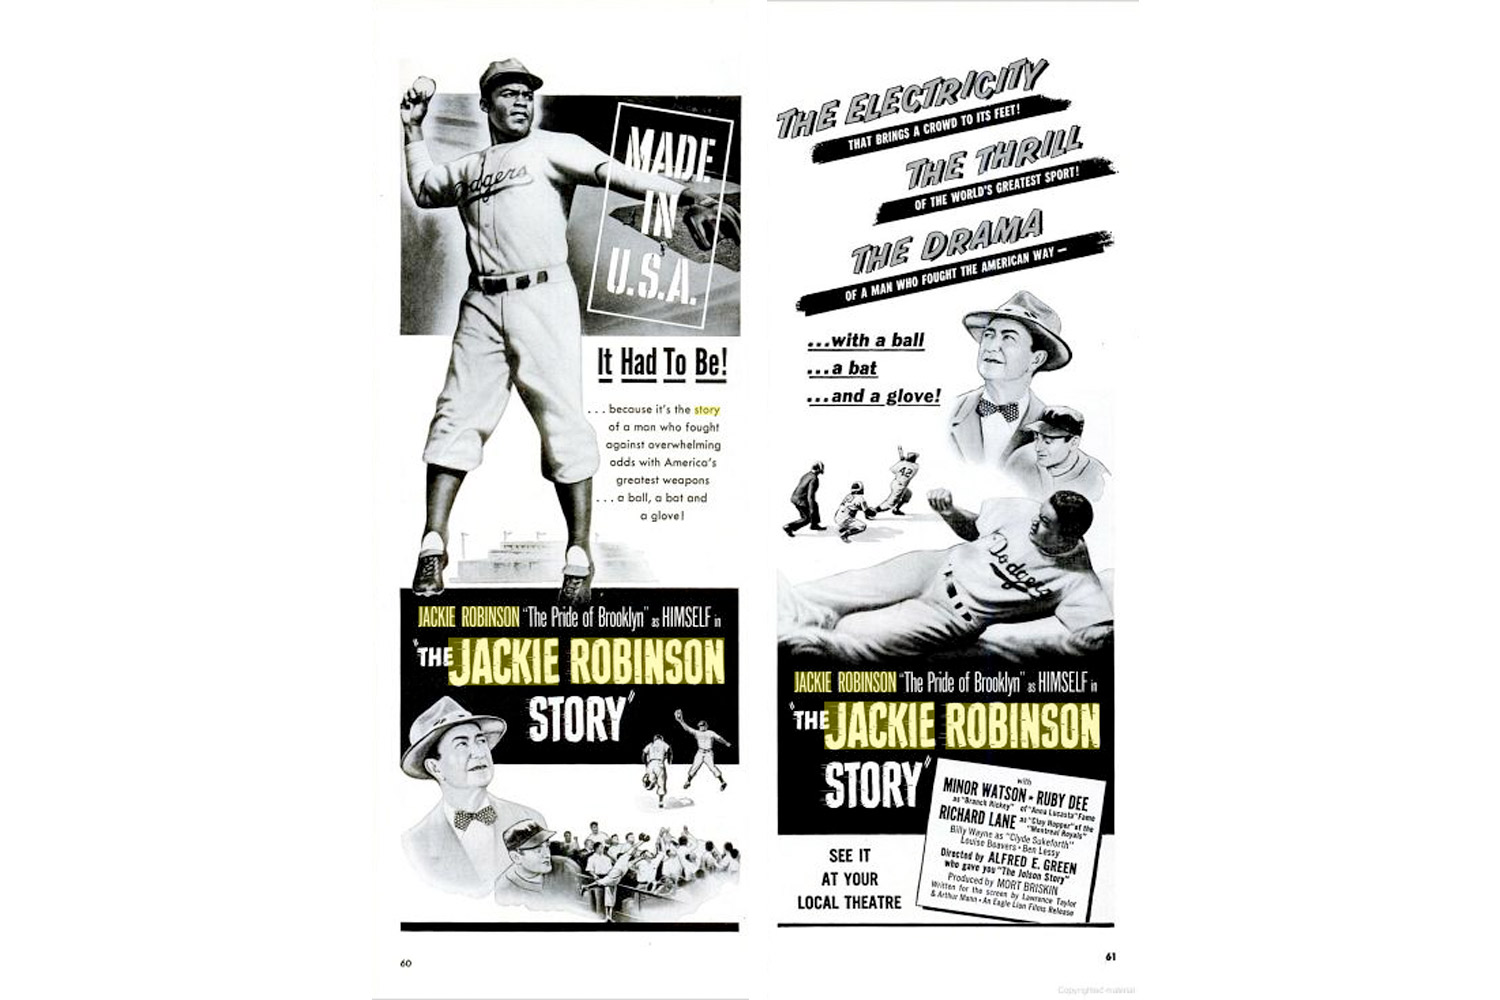 Advertisements for The Jackie Robinson Story from the May 15, 1950, issue of LIFE magazine.